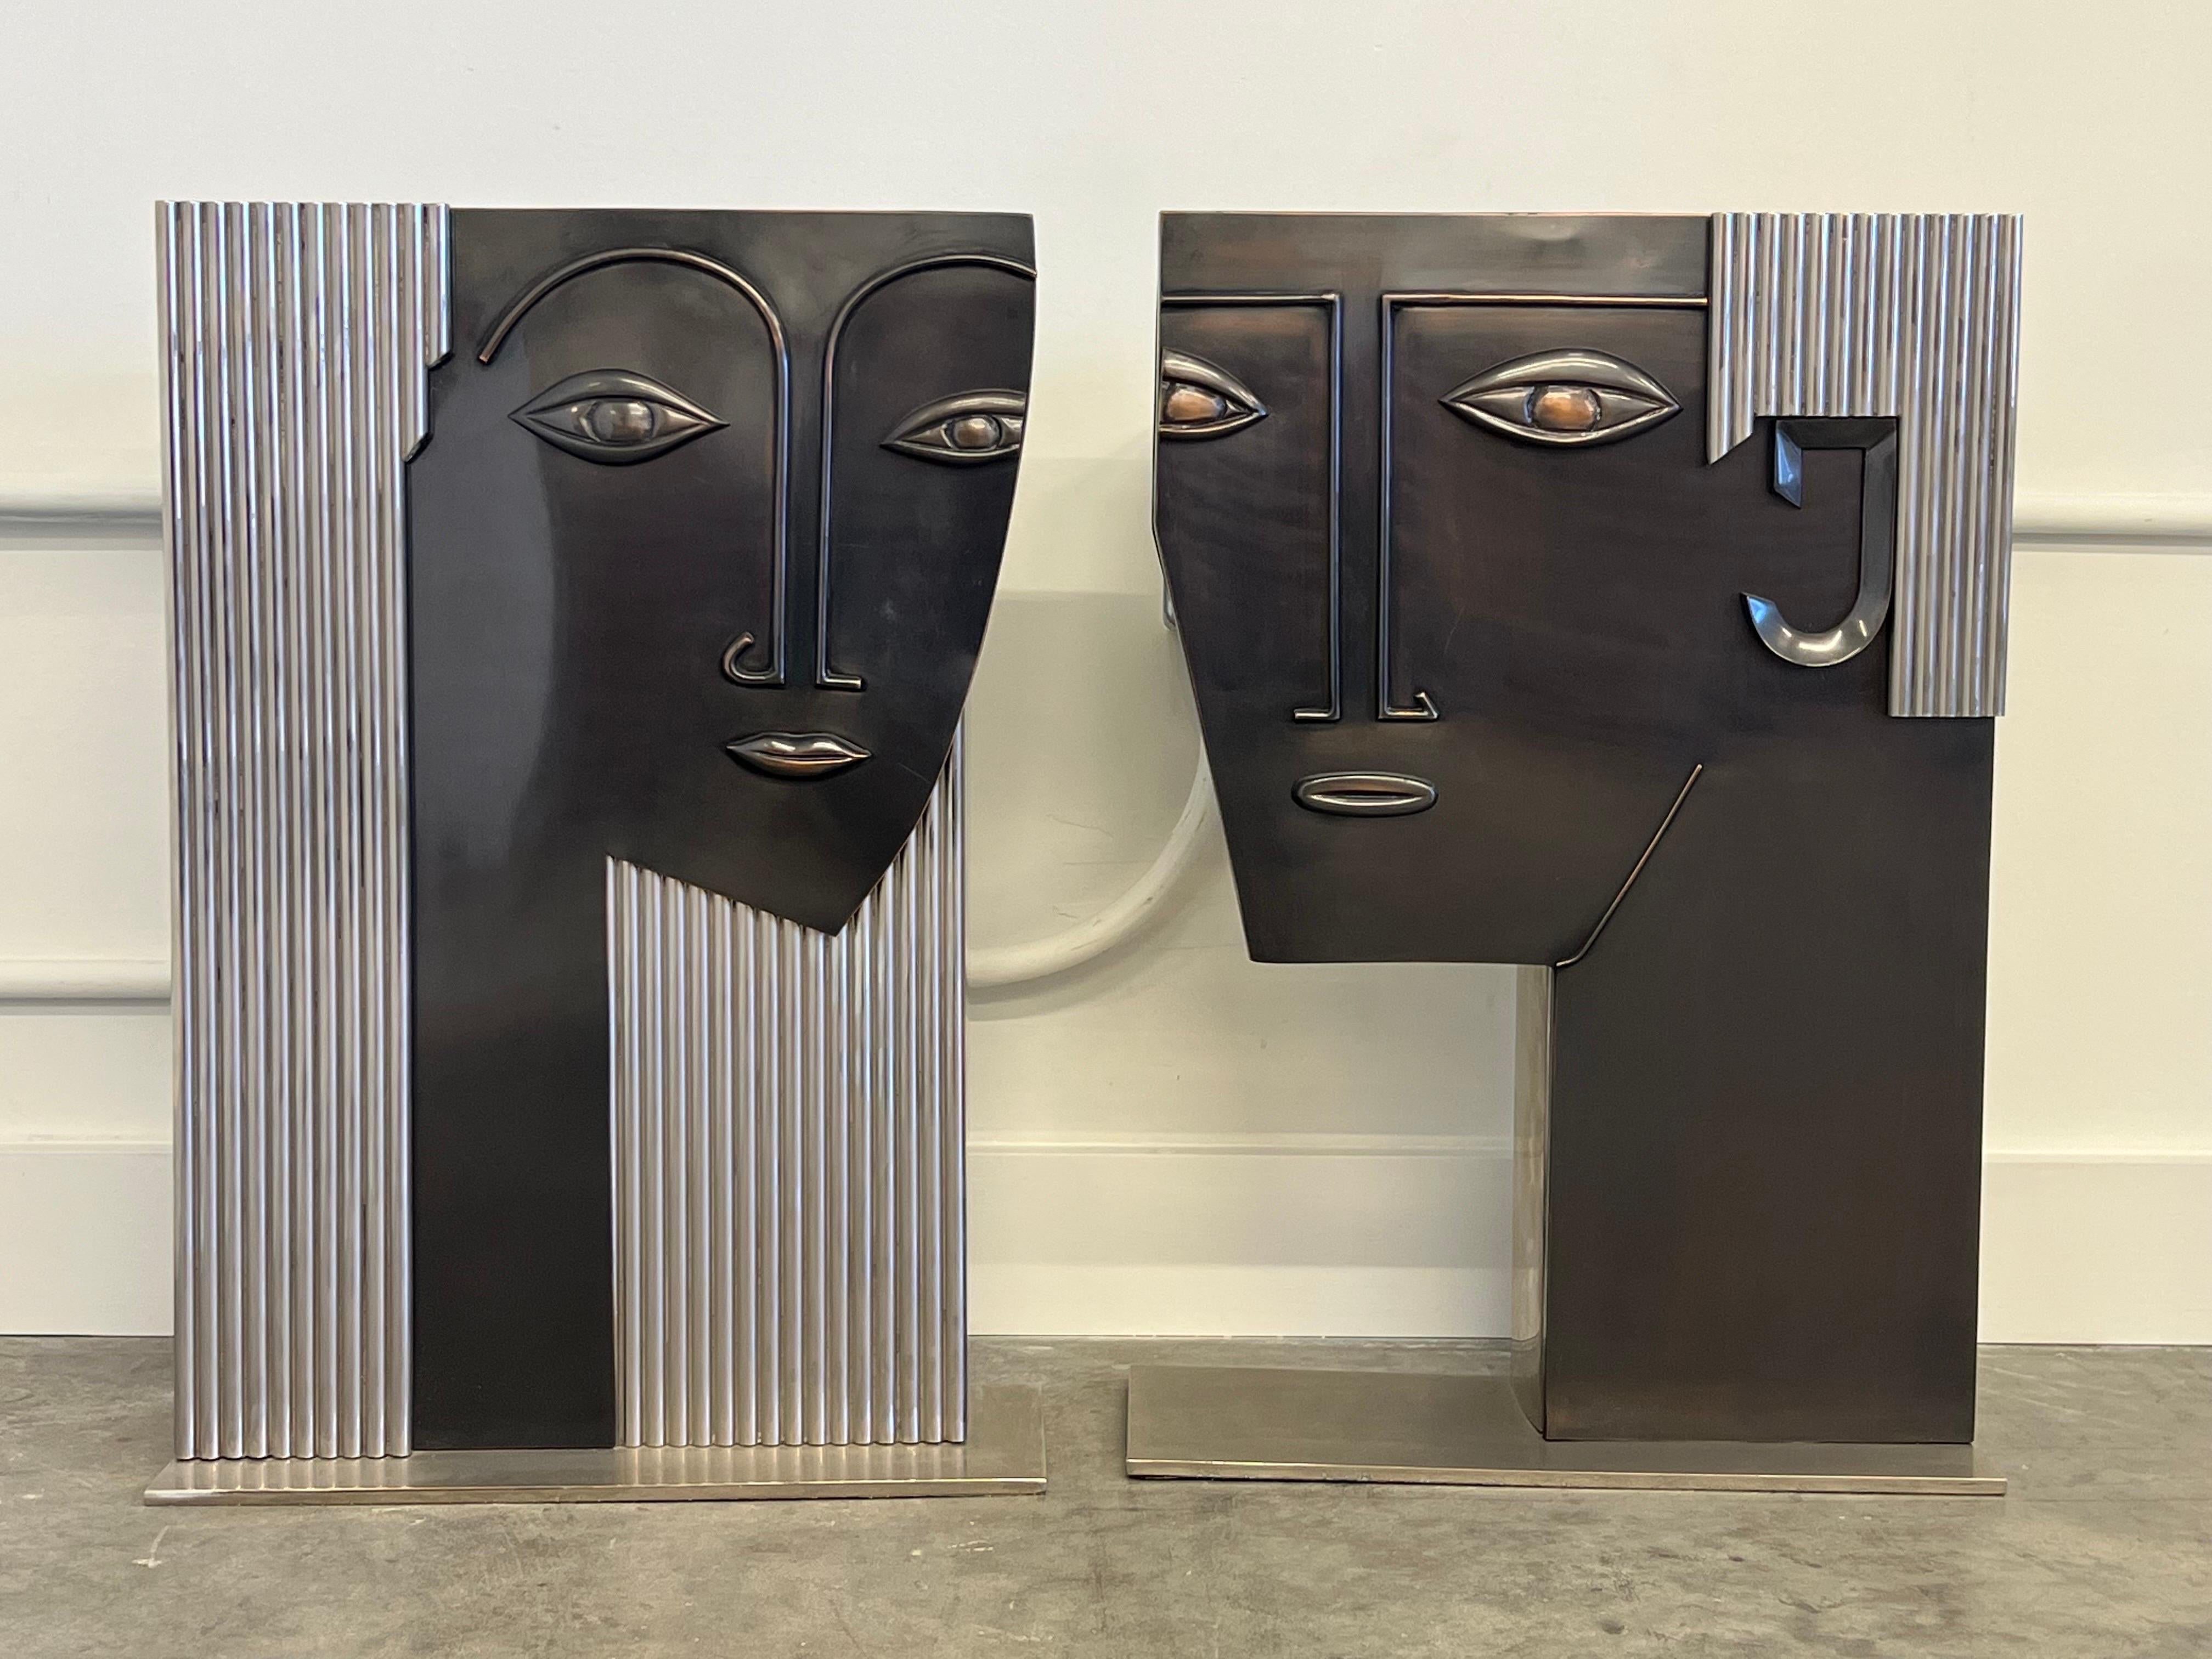 A pair of statement sculptures that can dual as a flower vase, umbrella stand, or just purely aesthetic. Extremely well made metal fabrication made in the manner of Franz Hagenauer. Asymmetrical stylized faces with chrome steel box as support. The